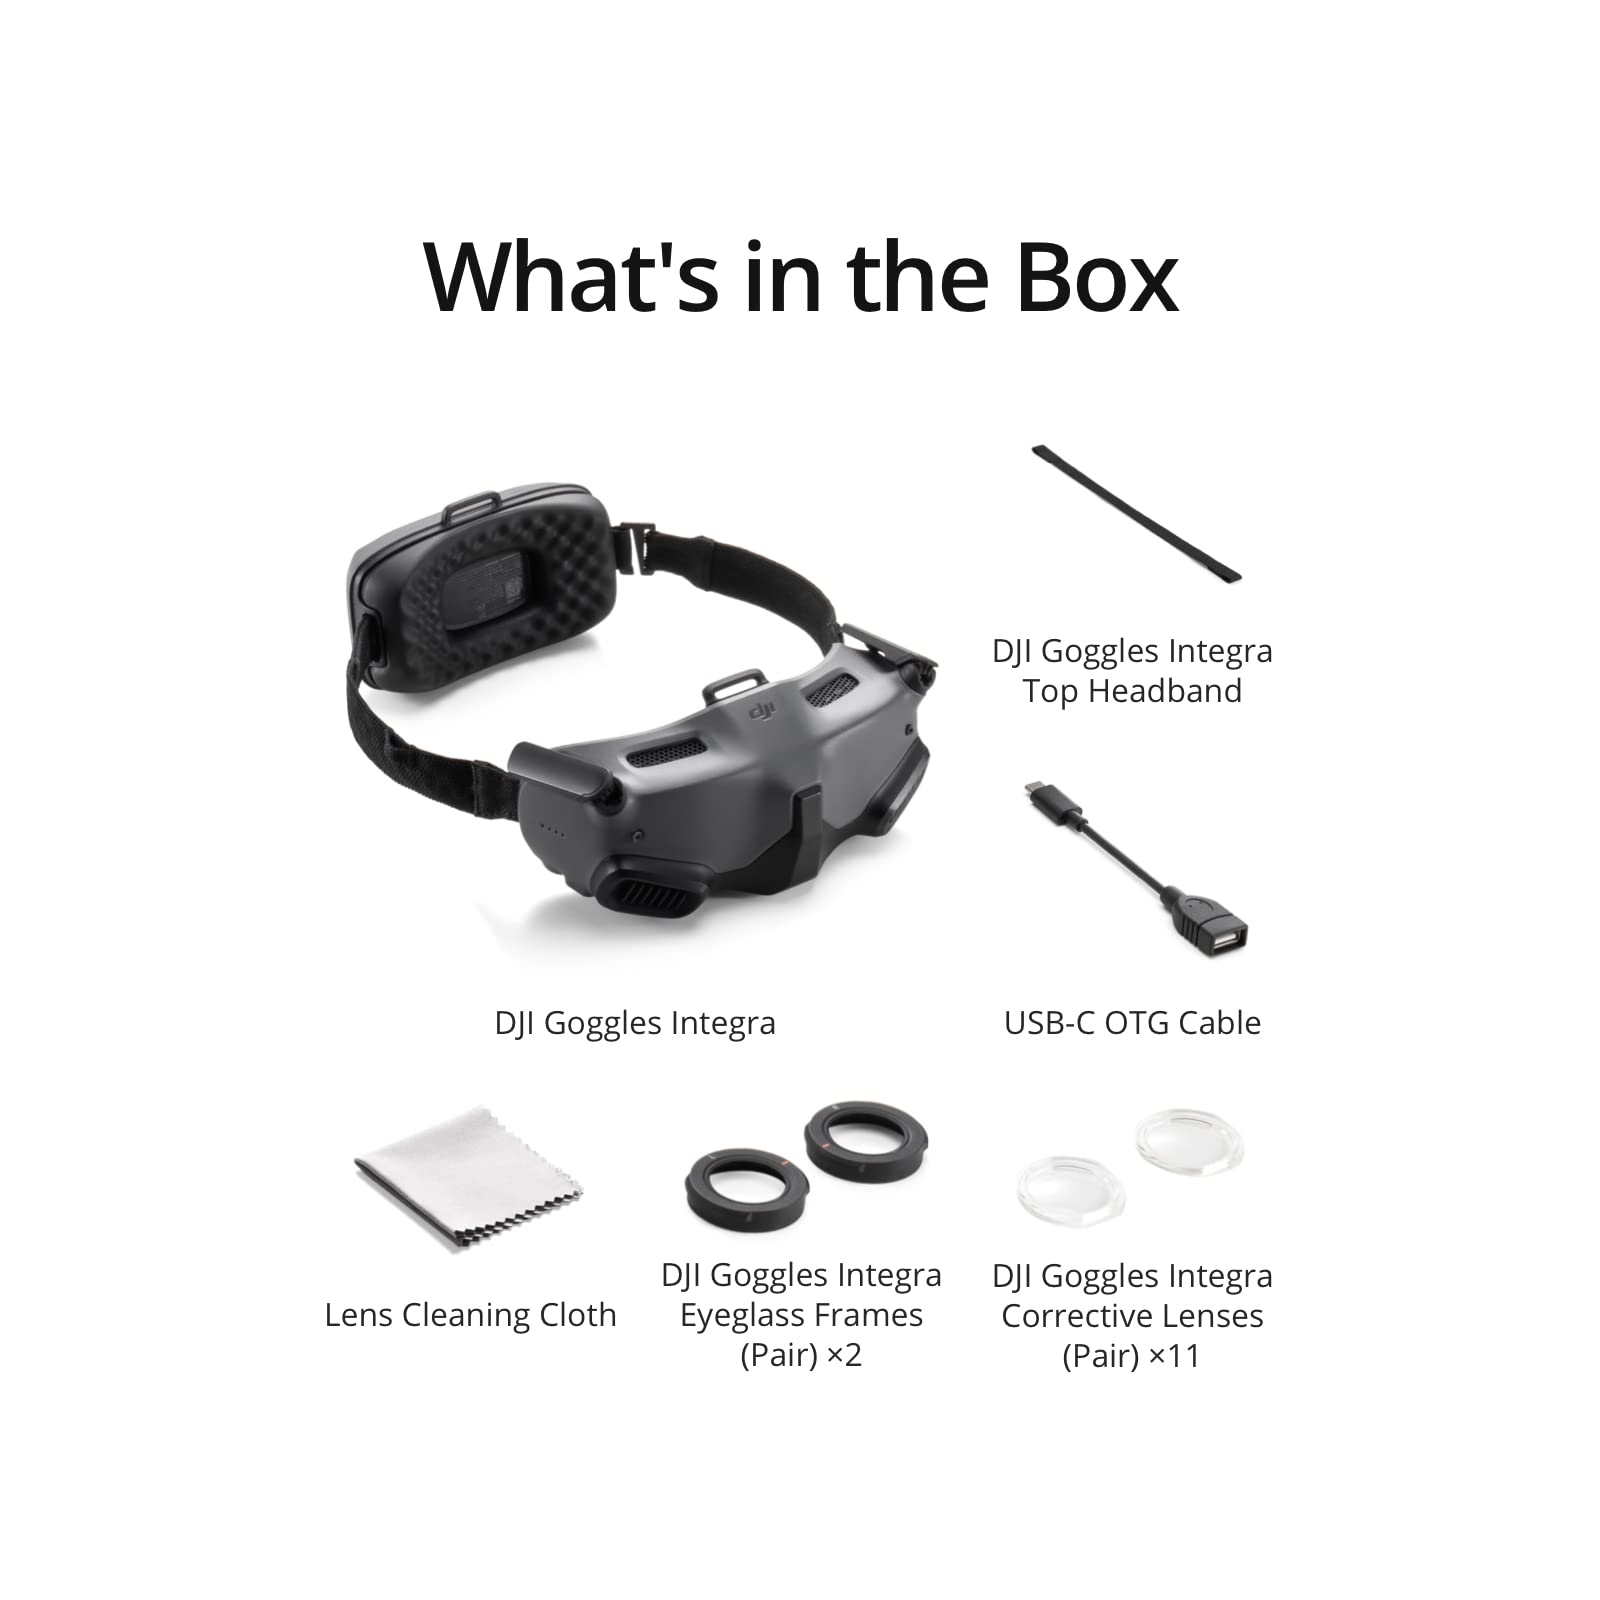 DJI Goggles Integra - Lightweight and Portable FPV Goggles, Integrated Design, Micro-OLED Screens, DJI O3+ Video Transmission, HD Low-Latency, Compatible with DJI Avata and More